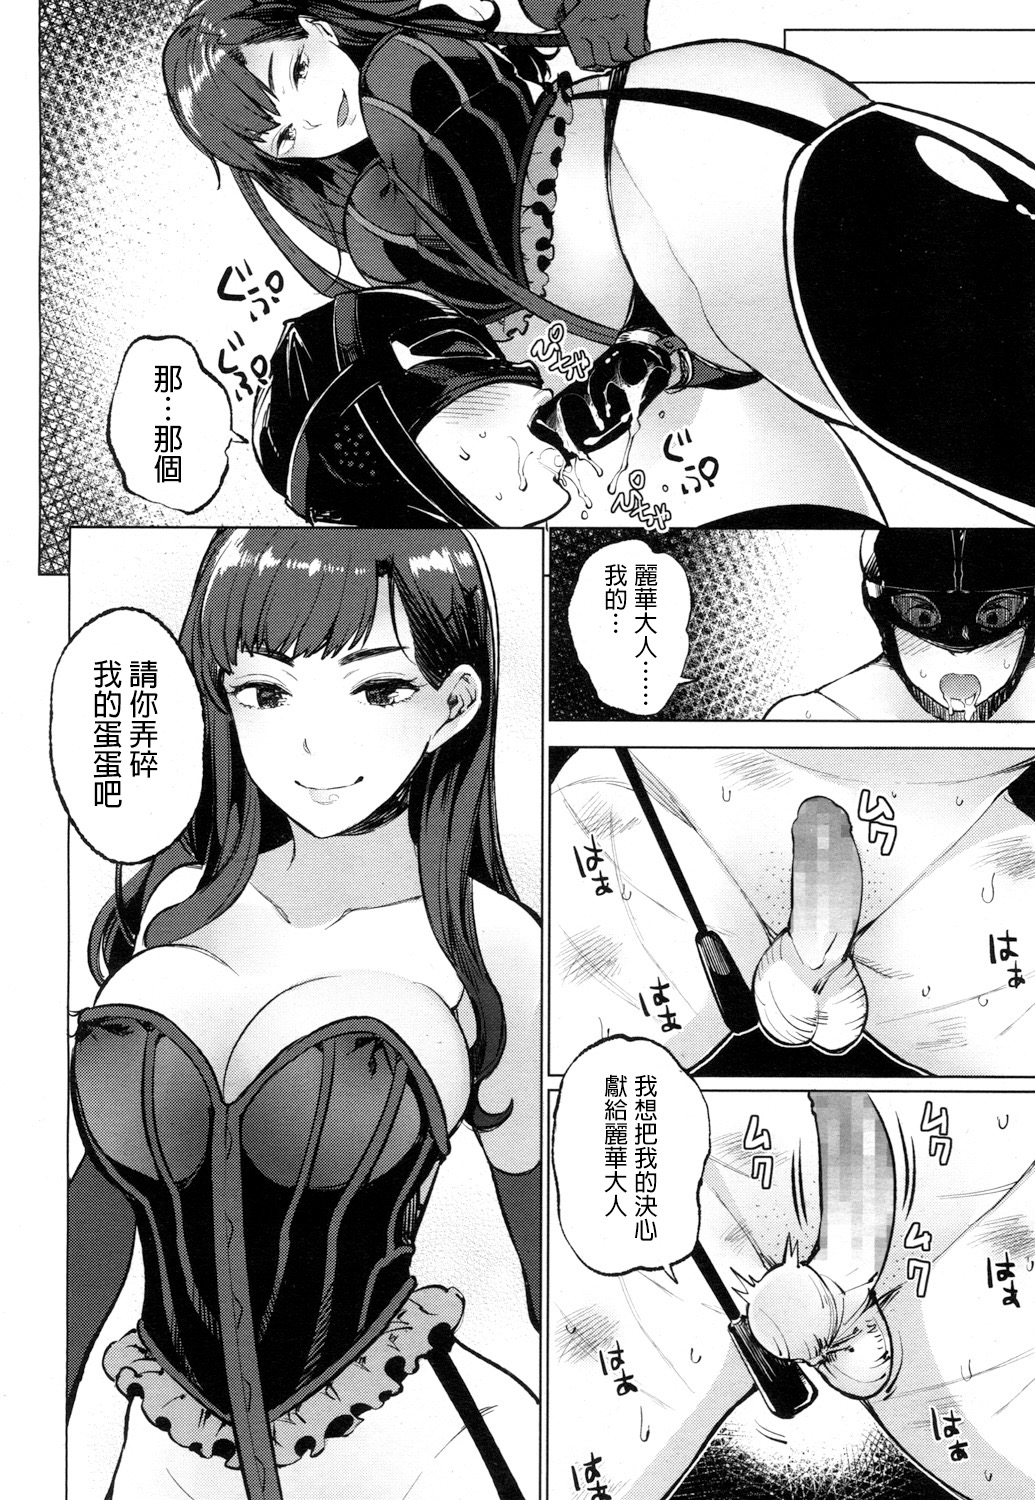 [Parabola] EgoS to S (Girls forM Vol.15) [Chinese] [沒有漢化] [Digital] page 19 full